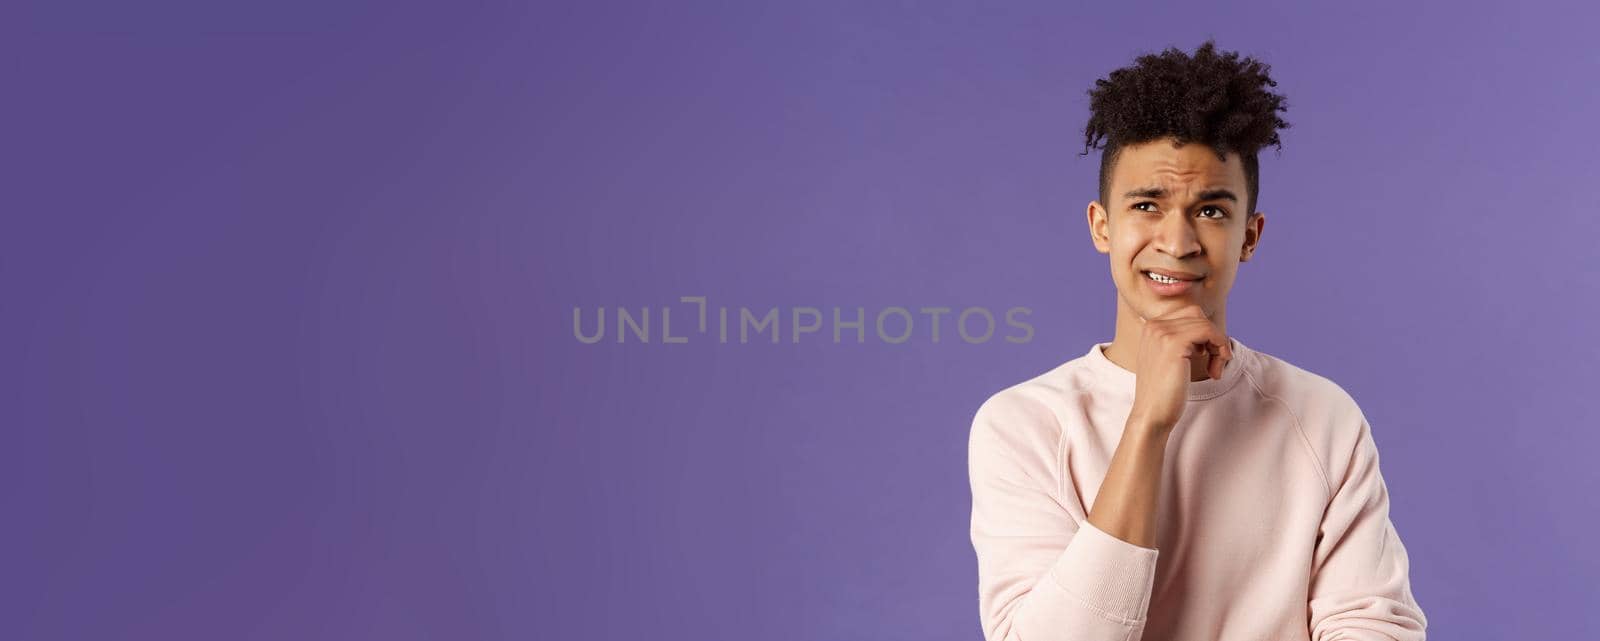 Close-up portrait of indecisive, puzzled young man facing difficult choice, look up thoughtful, touch chin and grimacing while thinking, making-up idea or decision, purple background by Benzoix